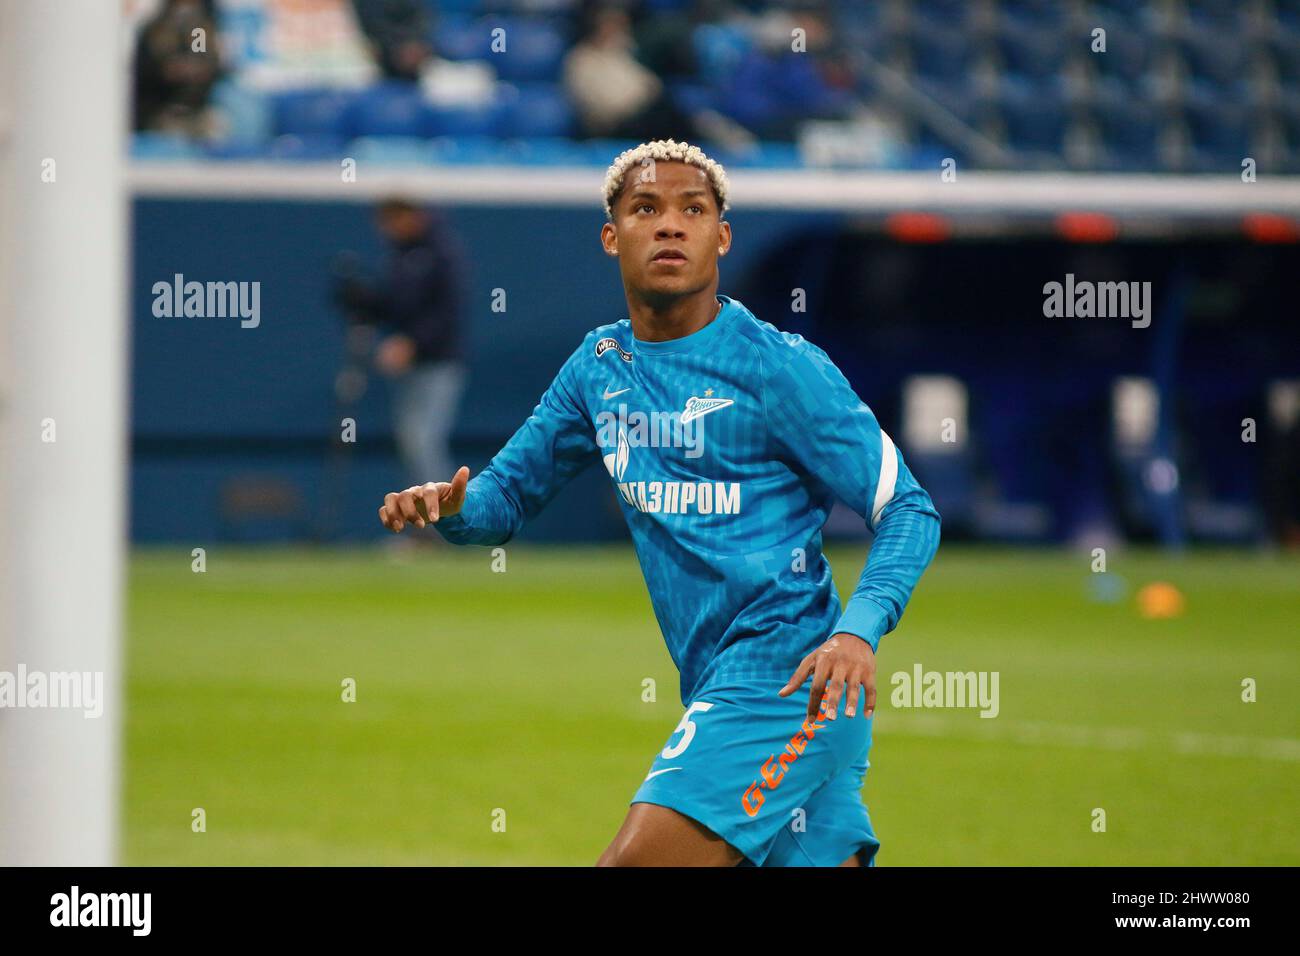 Saint Petersburg, Russia. 07th Mar, 2022. Wilmar Henrique Barrios Teran, commonly known as Wilmar Barrios (No.5) of Zenit compete during the Russian Premier League football match between Zenit Saint Petersburg and Ufa at Gazprom Arena. Final score; Zenit 2:0 Ufa. Credit: SOPA Images Limited/Alamy Live News Stock Photo